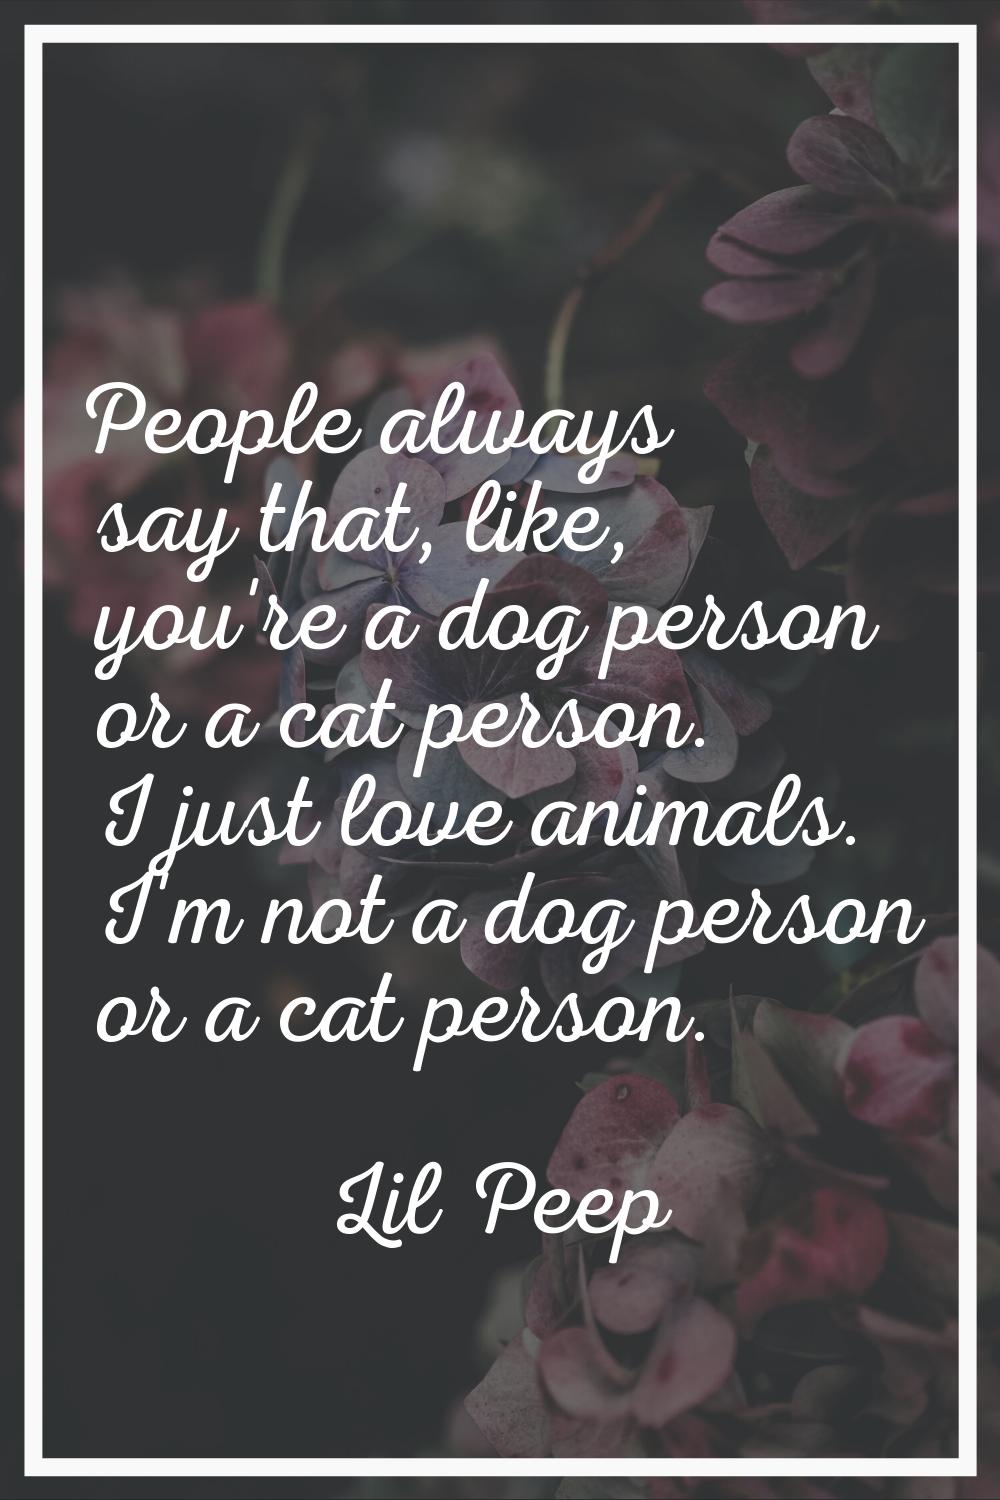 People always say that, like, you're a dog person or a cat person. I just love animals. I'm not a d